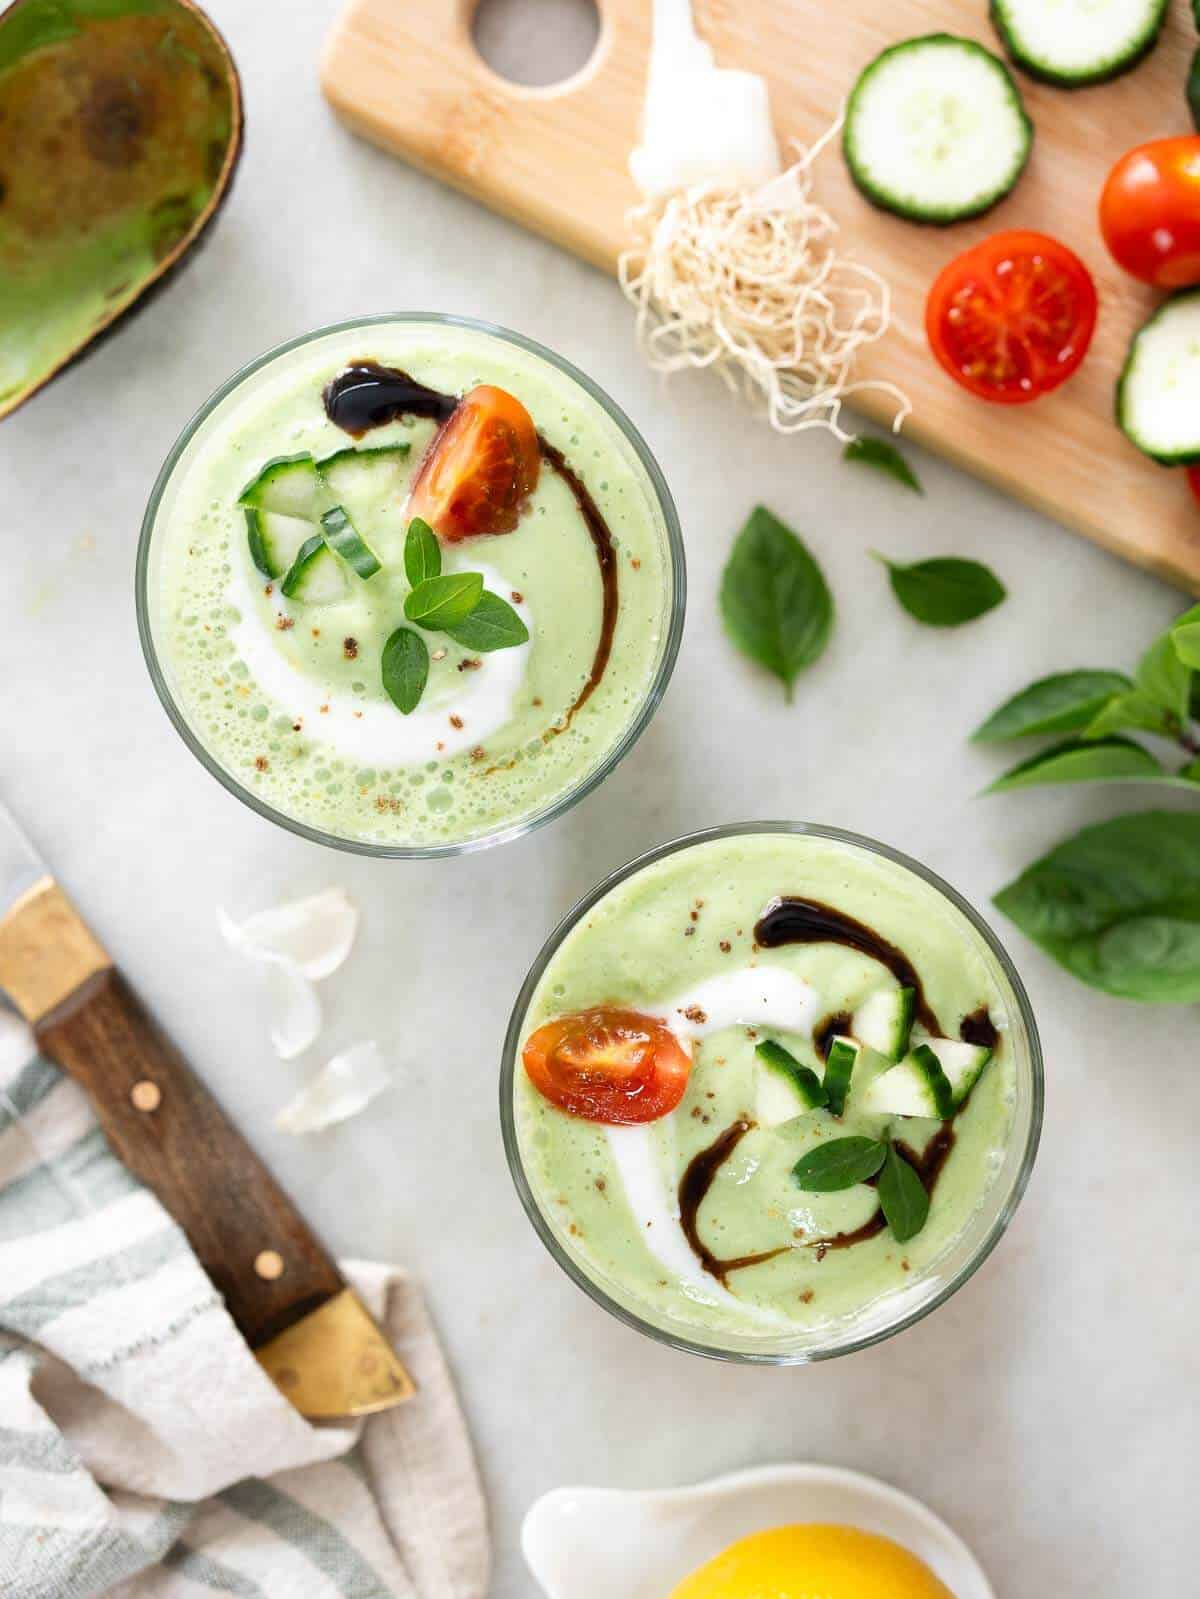 two glasses of chilled basil cucumber soup served with a swirl of balsamic glaze, tomato and cucumber slices, and yogurt.